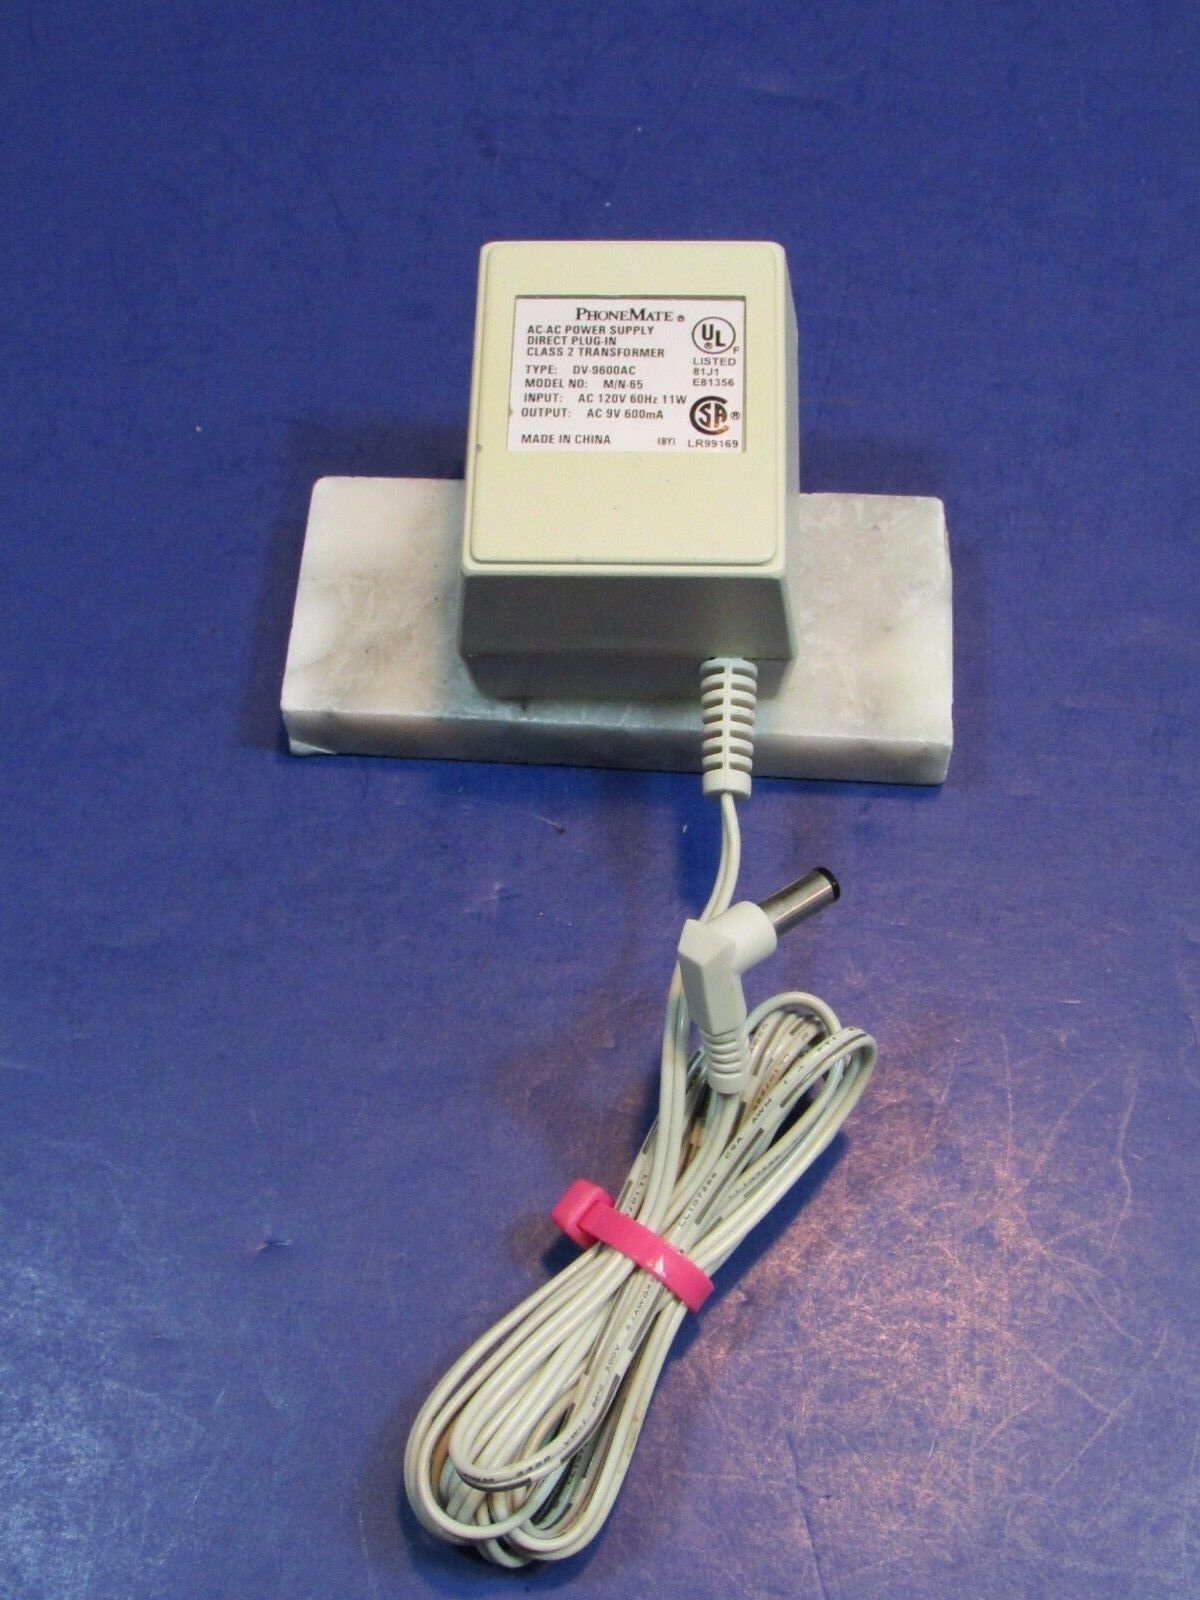 PhoneMate M/N-65 AC/AC Adapter Power Supply Class 2 Transformer TESTED Output Voltage: 9V Model: M/N-65 Brand: Phon